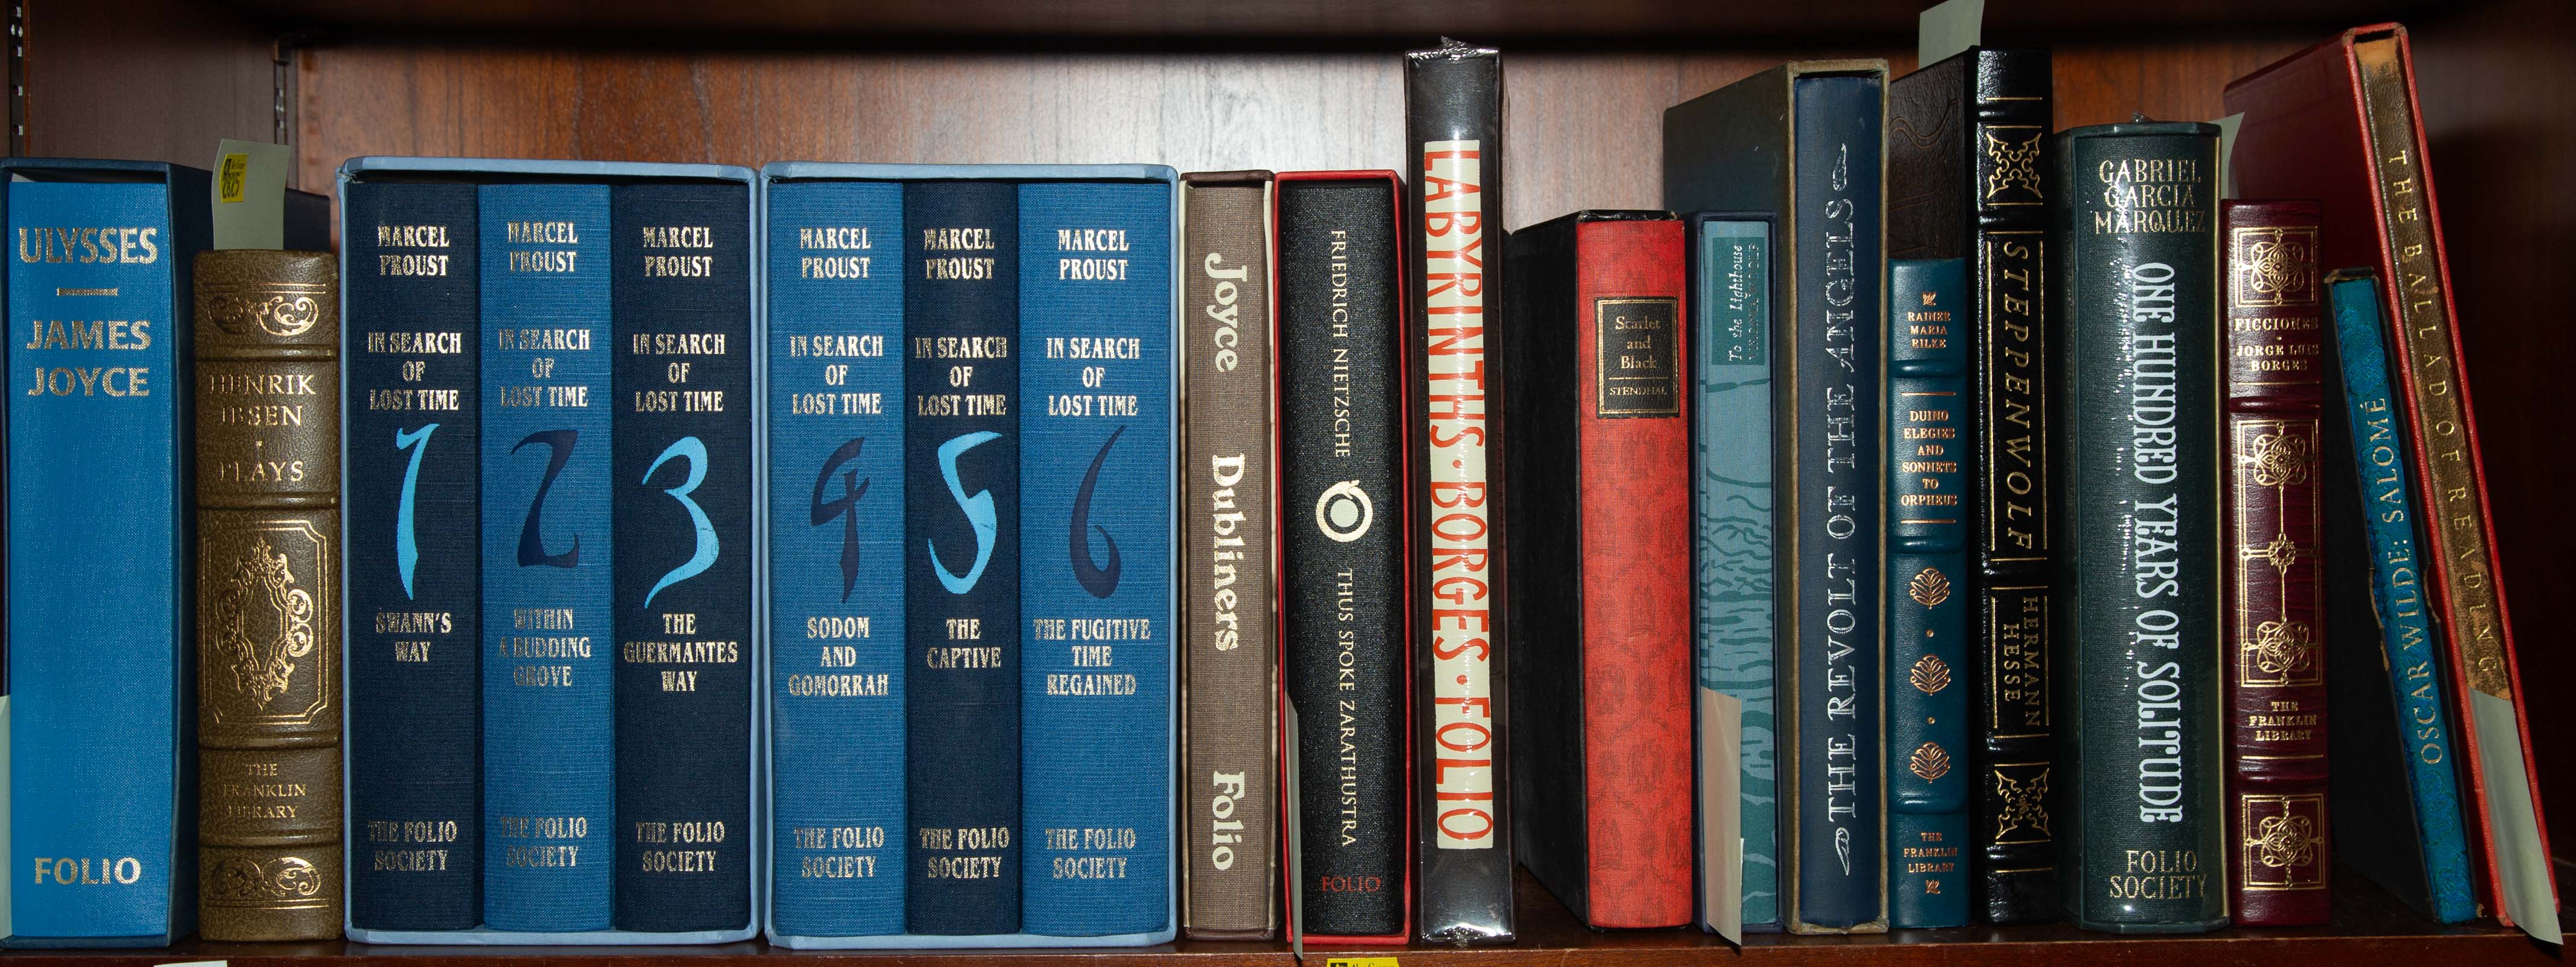 SELECTION OF 20TH-CENTURY LITERATURE